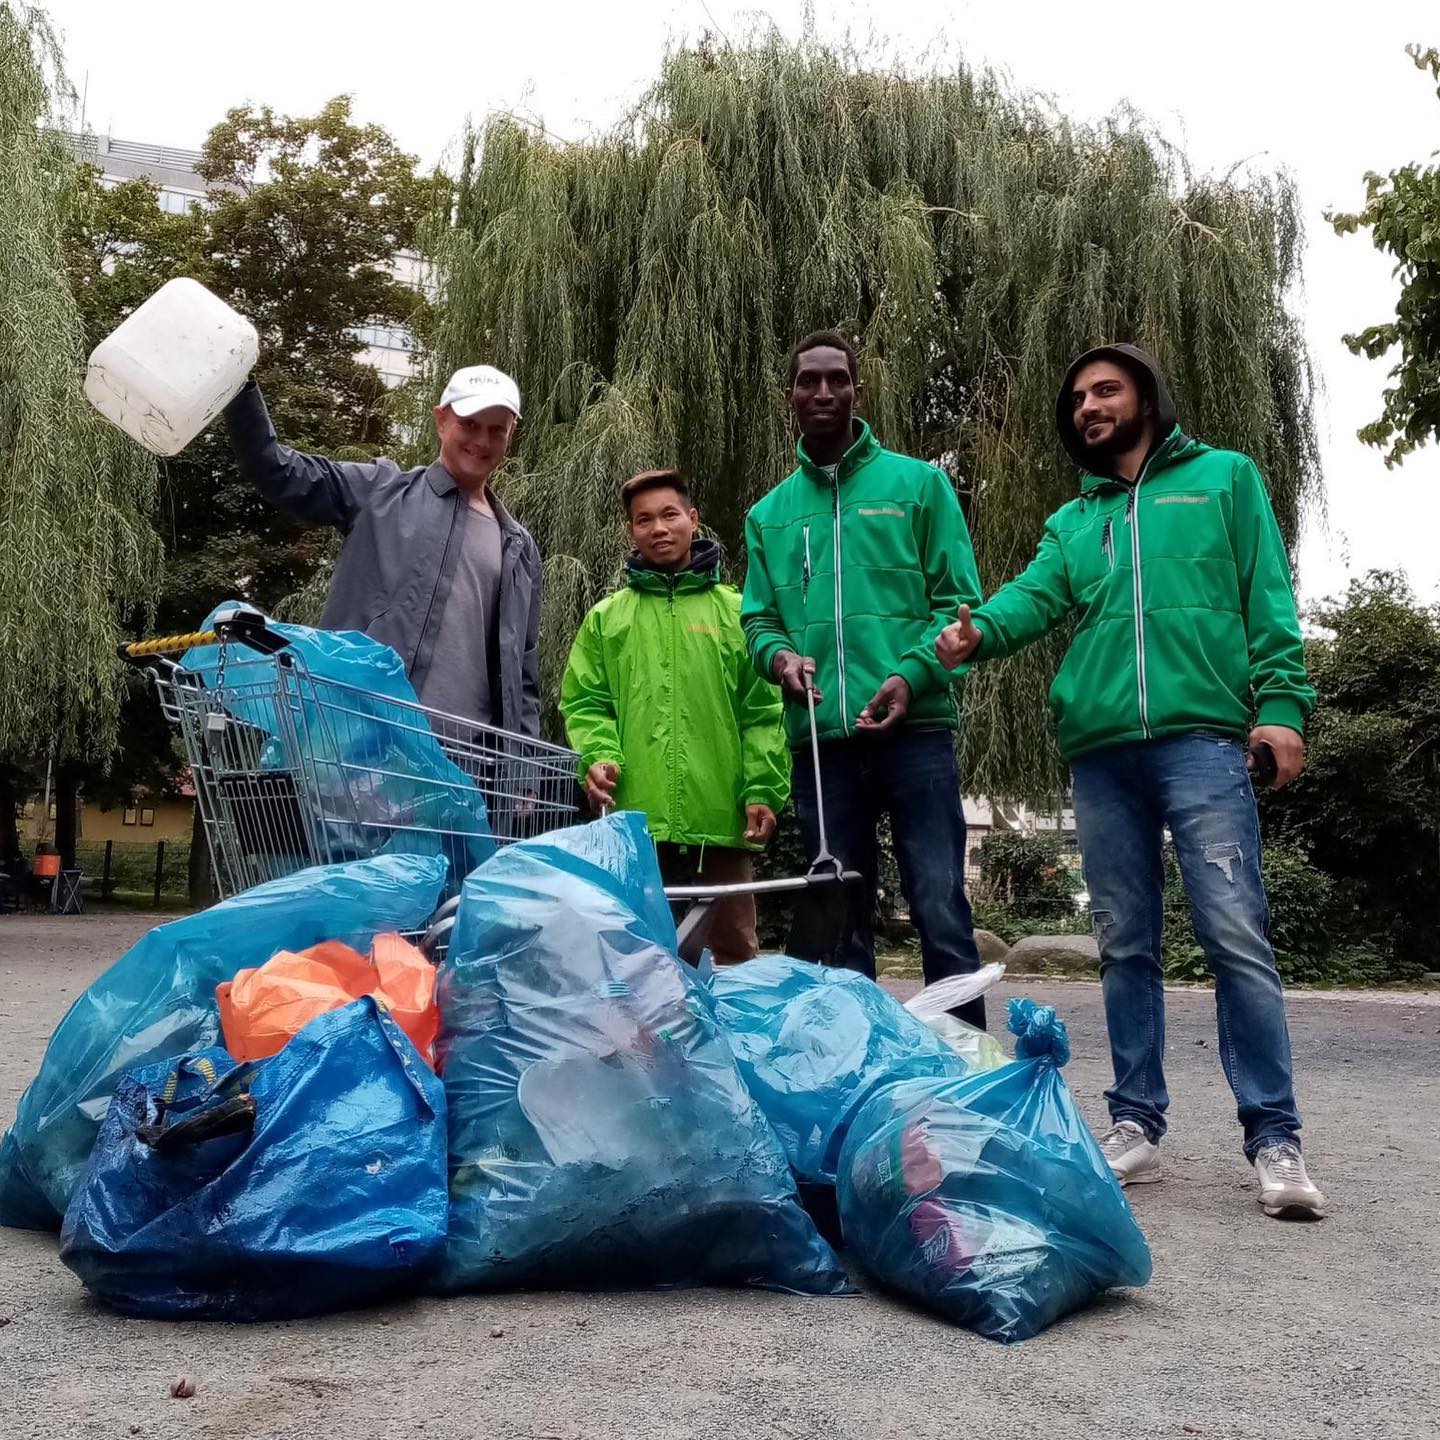 Cleanup Day in Cheruskerpark (Berlin)